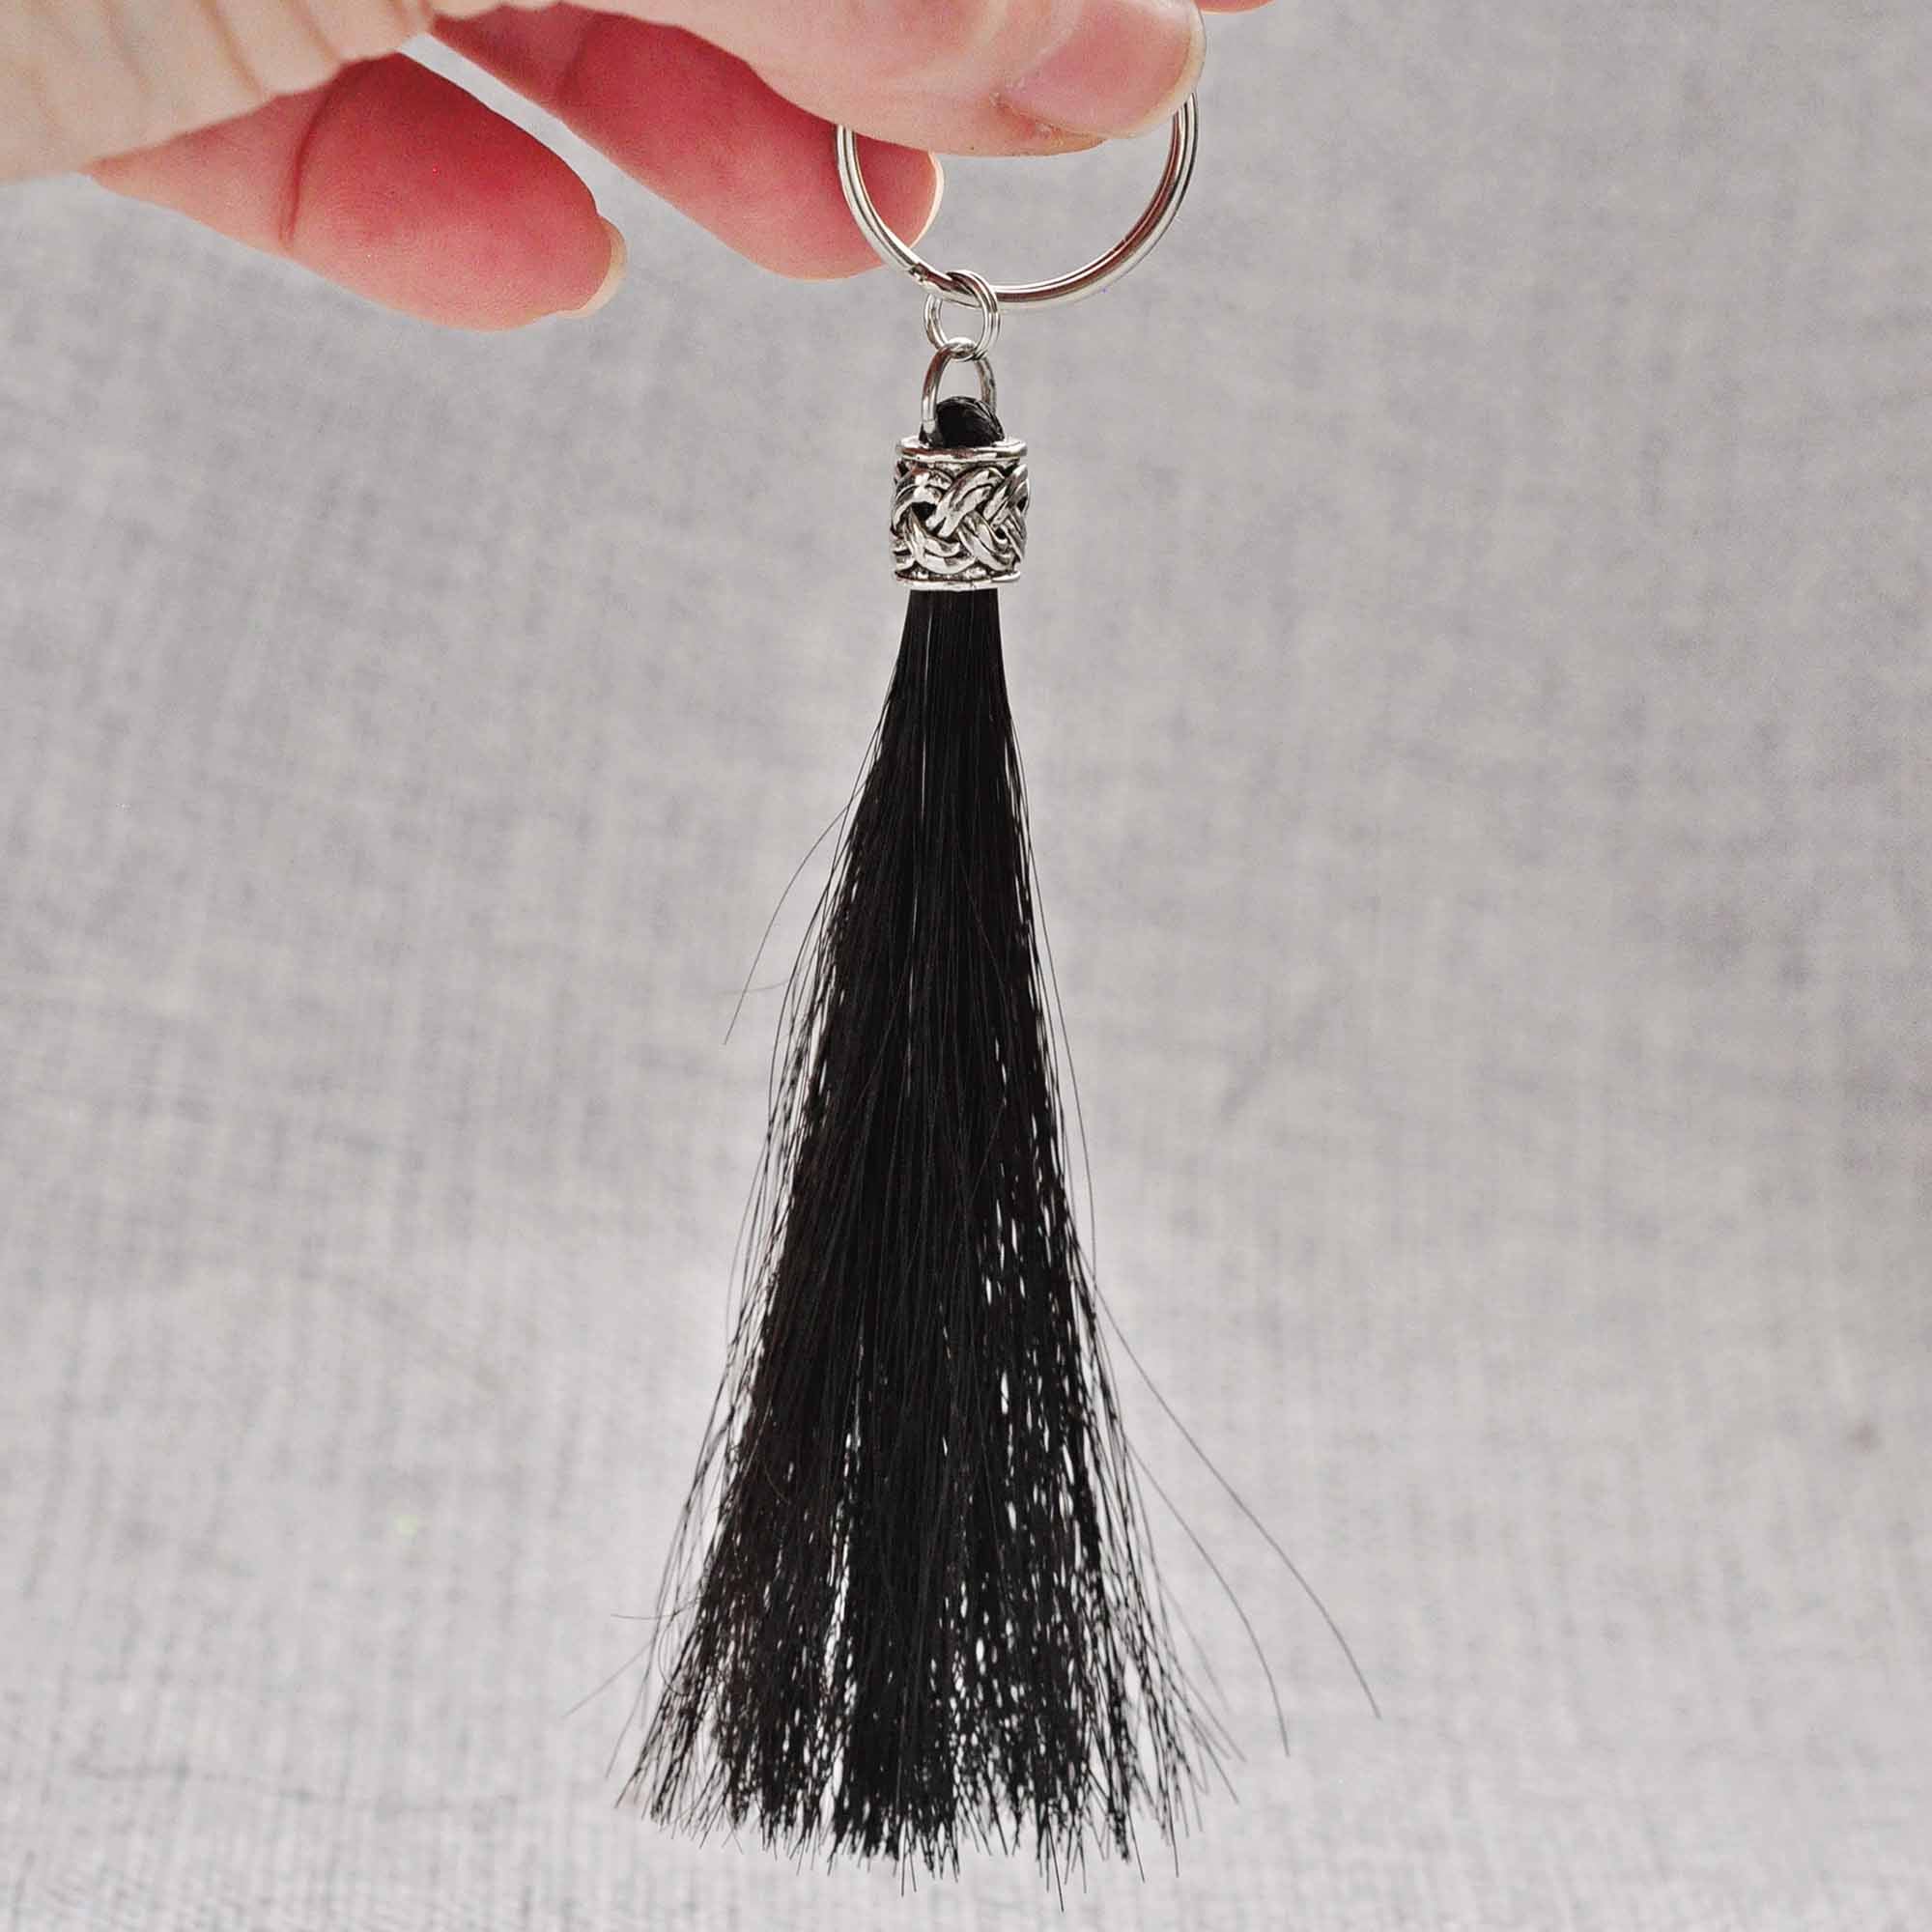 Horse Hair Keychains and Tassels — More Than A Horse Keepsakes